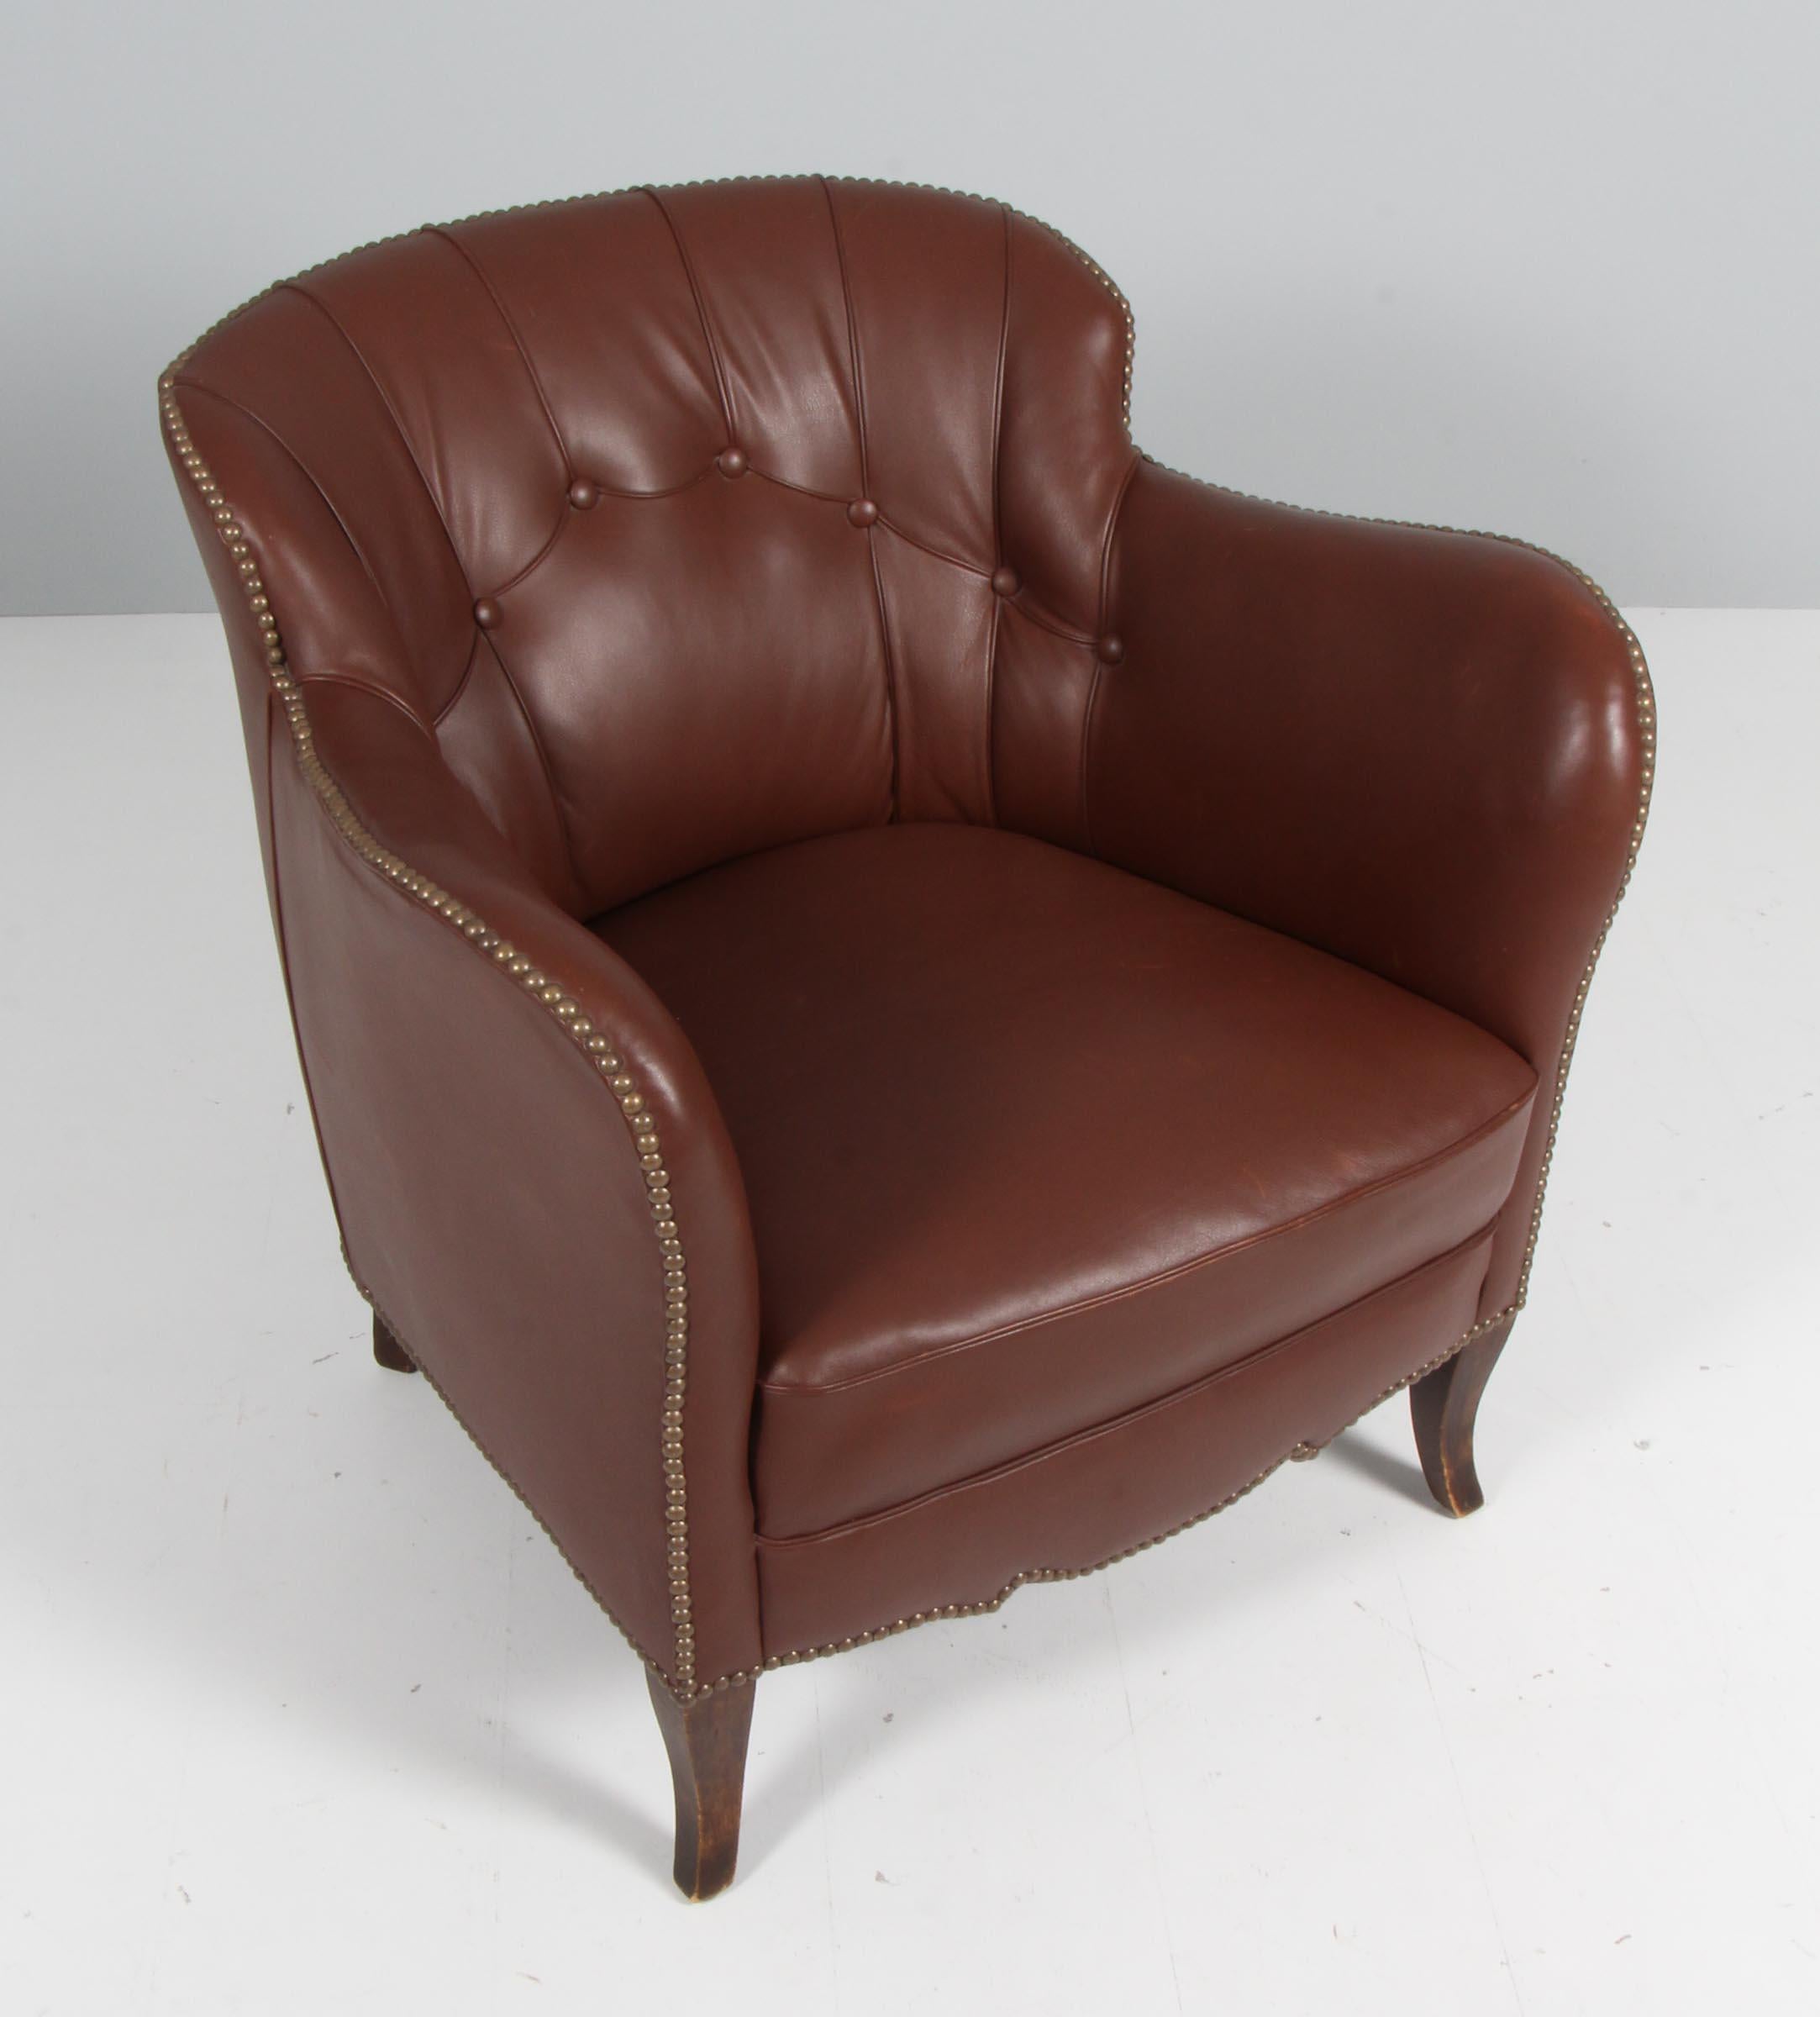 Danish cabinetmaker club chair in original brown patinated leather.

Legs of stained beech.

Made in the 1940s.